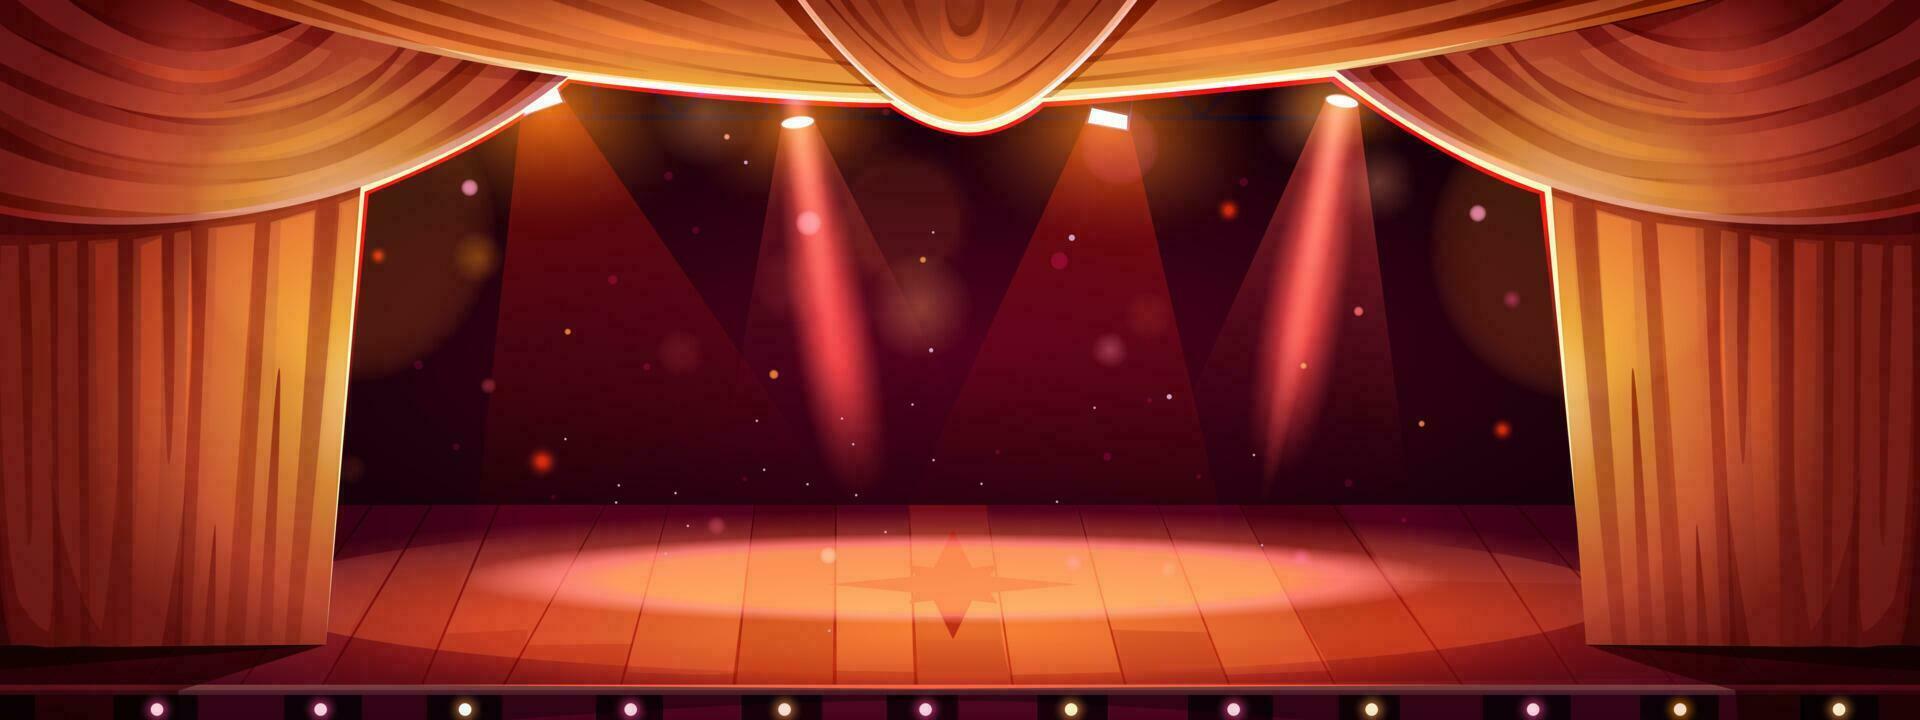 Theater concert stage with curtain cartoon scene vector